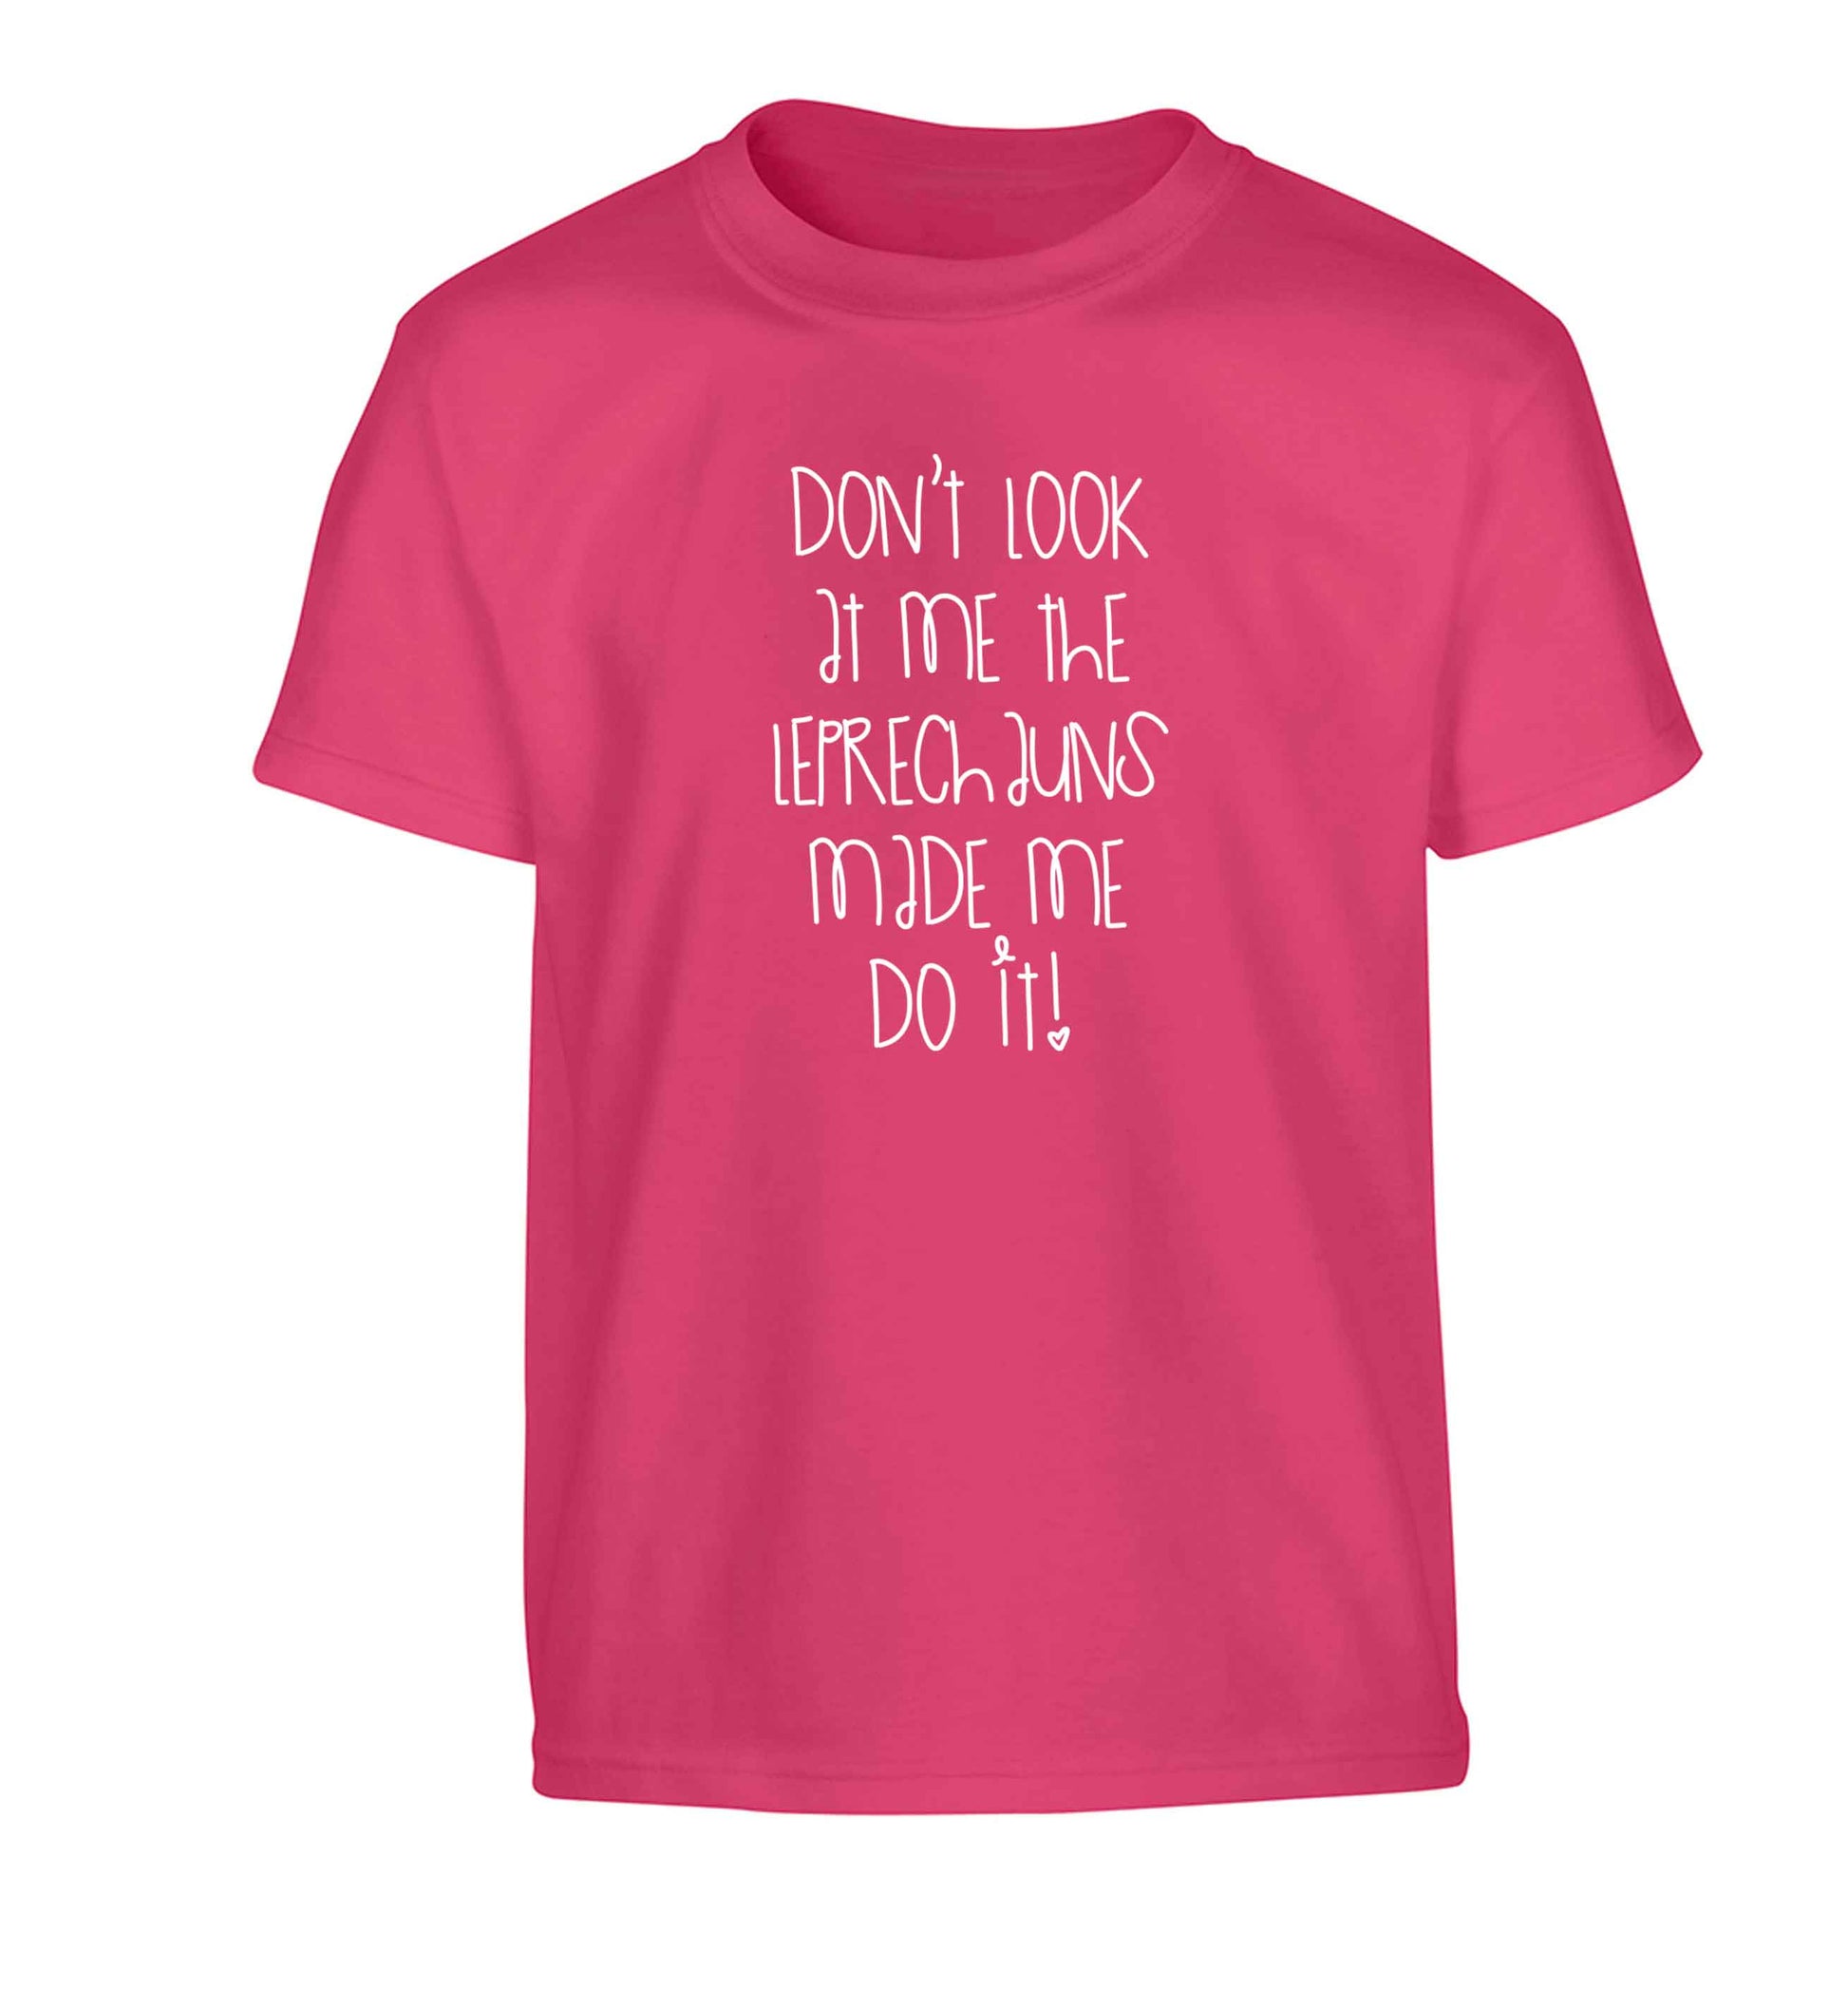 Don't look at me the leprechauns made me do it Children's pink Tshirt 12-13 Years